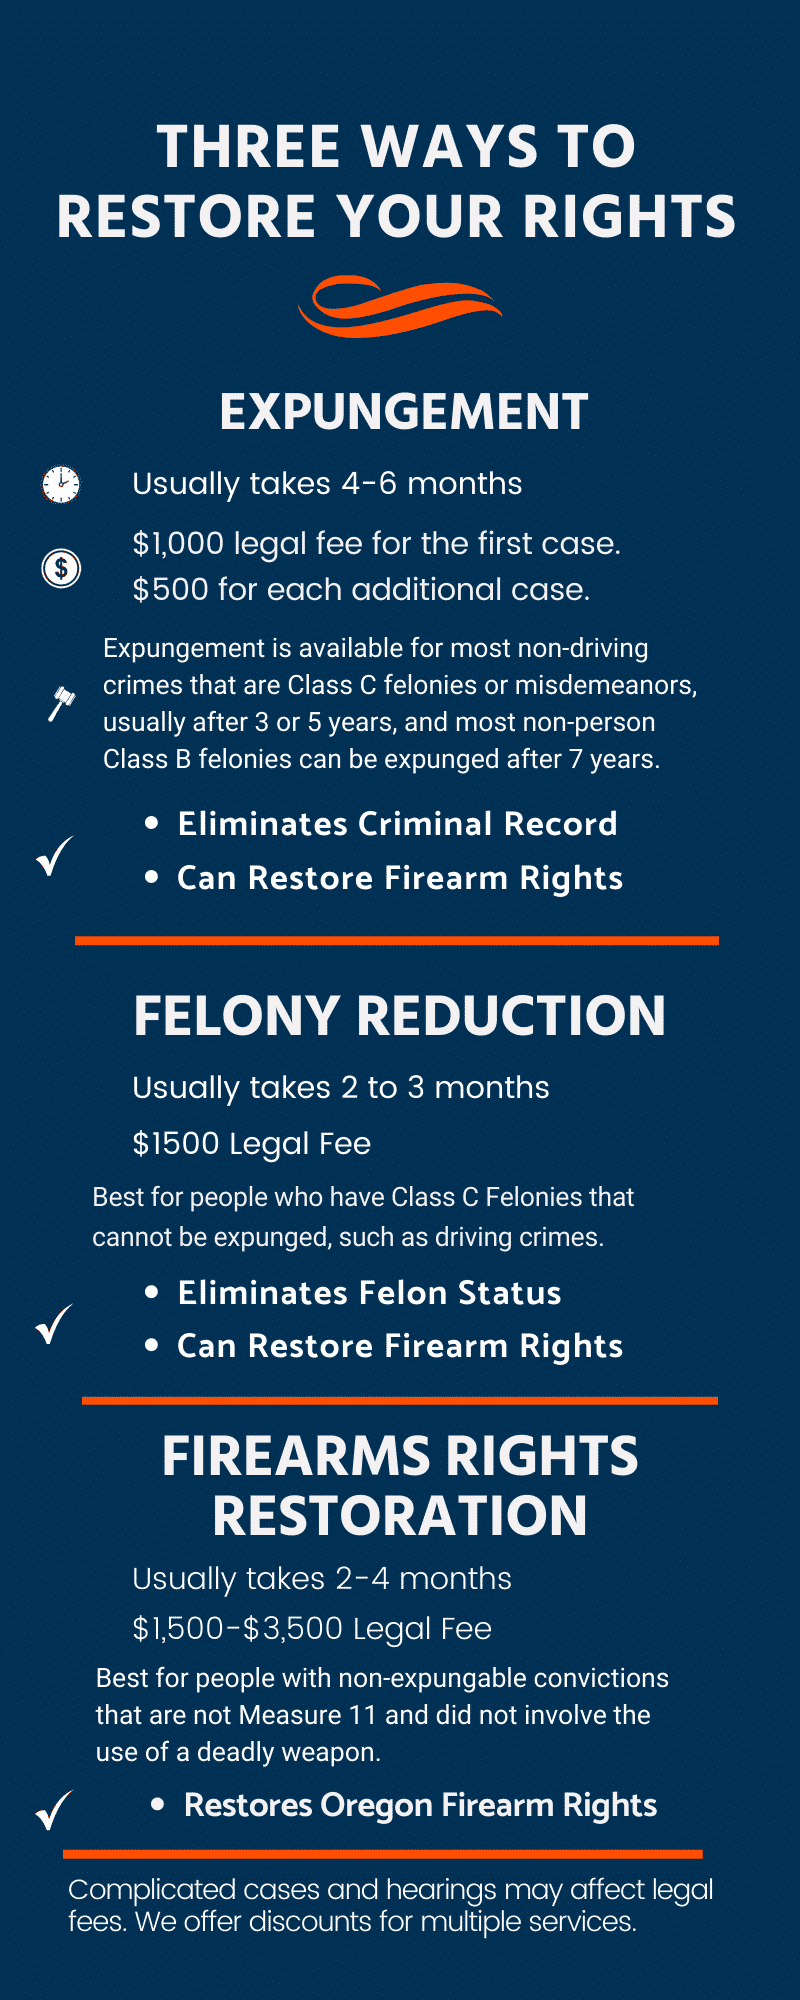 Three way to Restore Your Rights